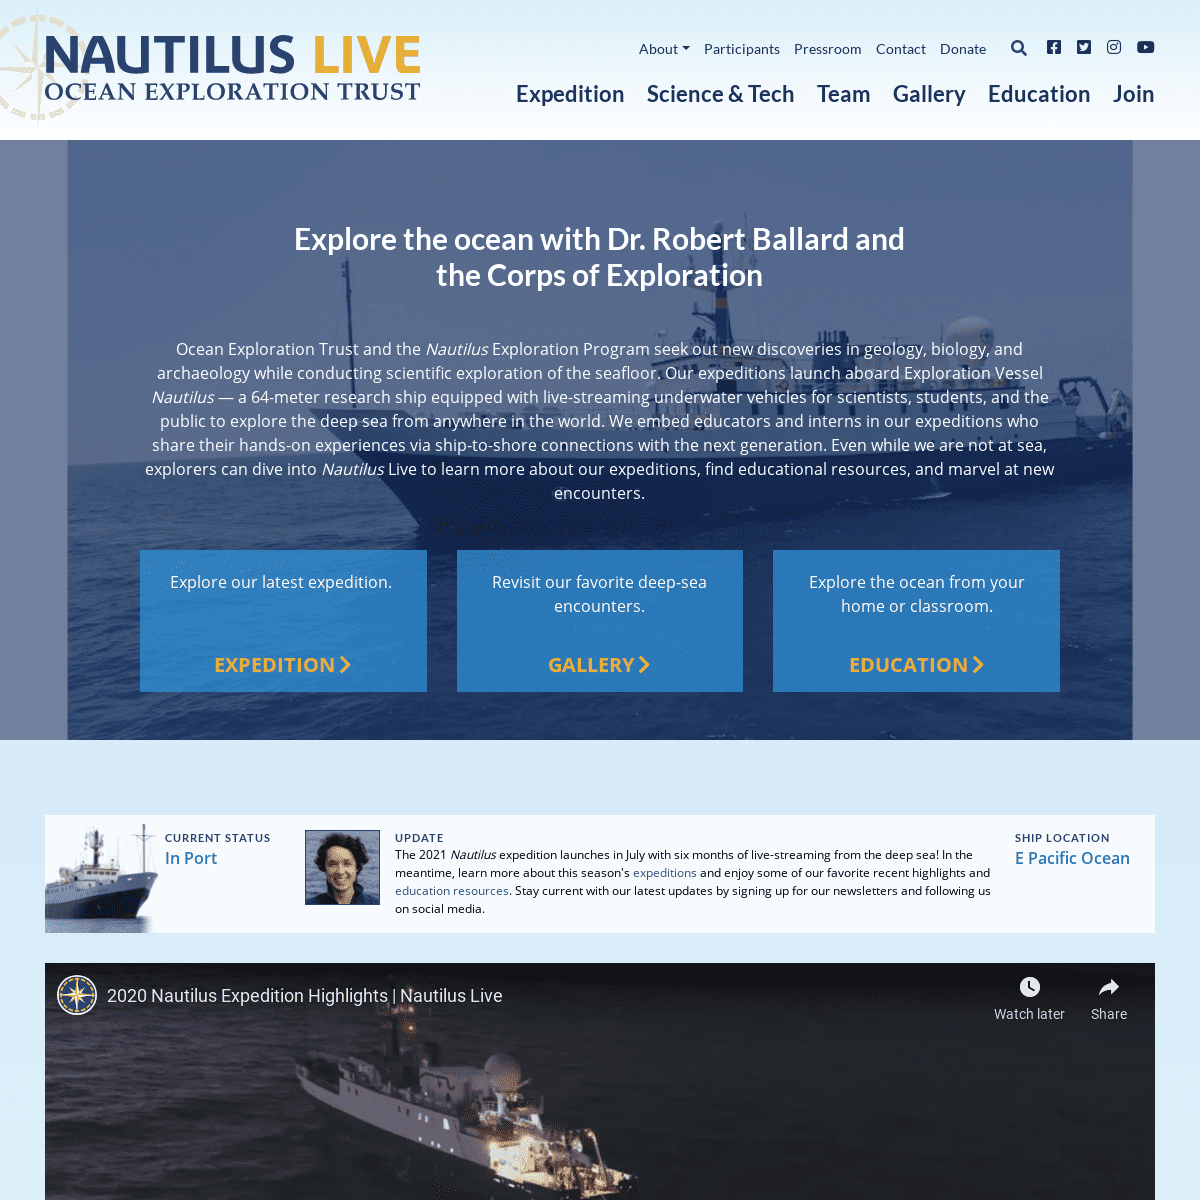 A complete backup of https://nautiluslive.org